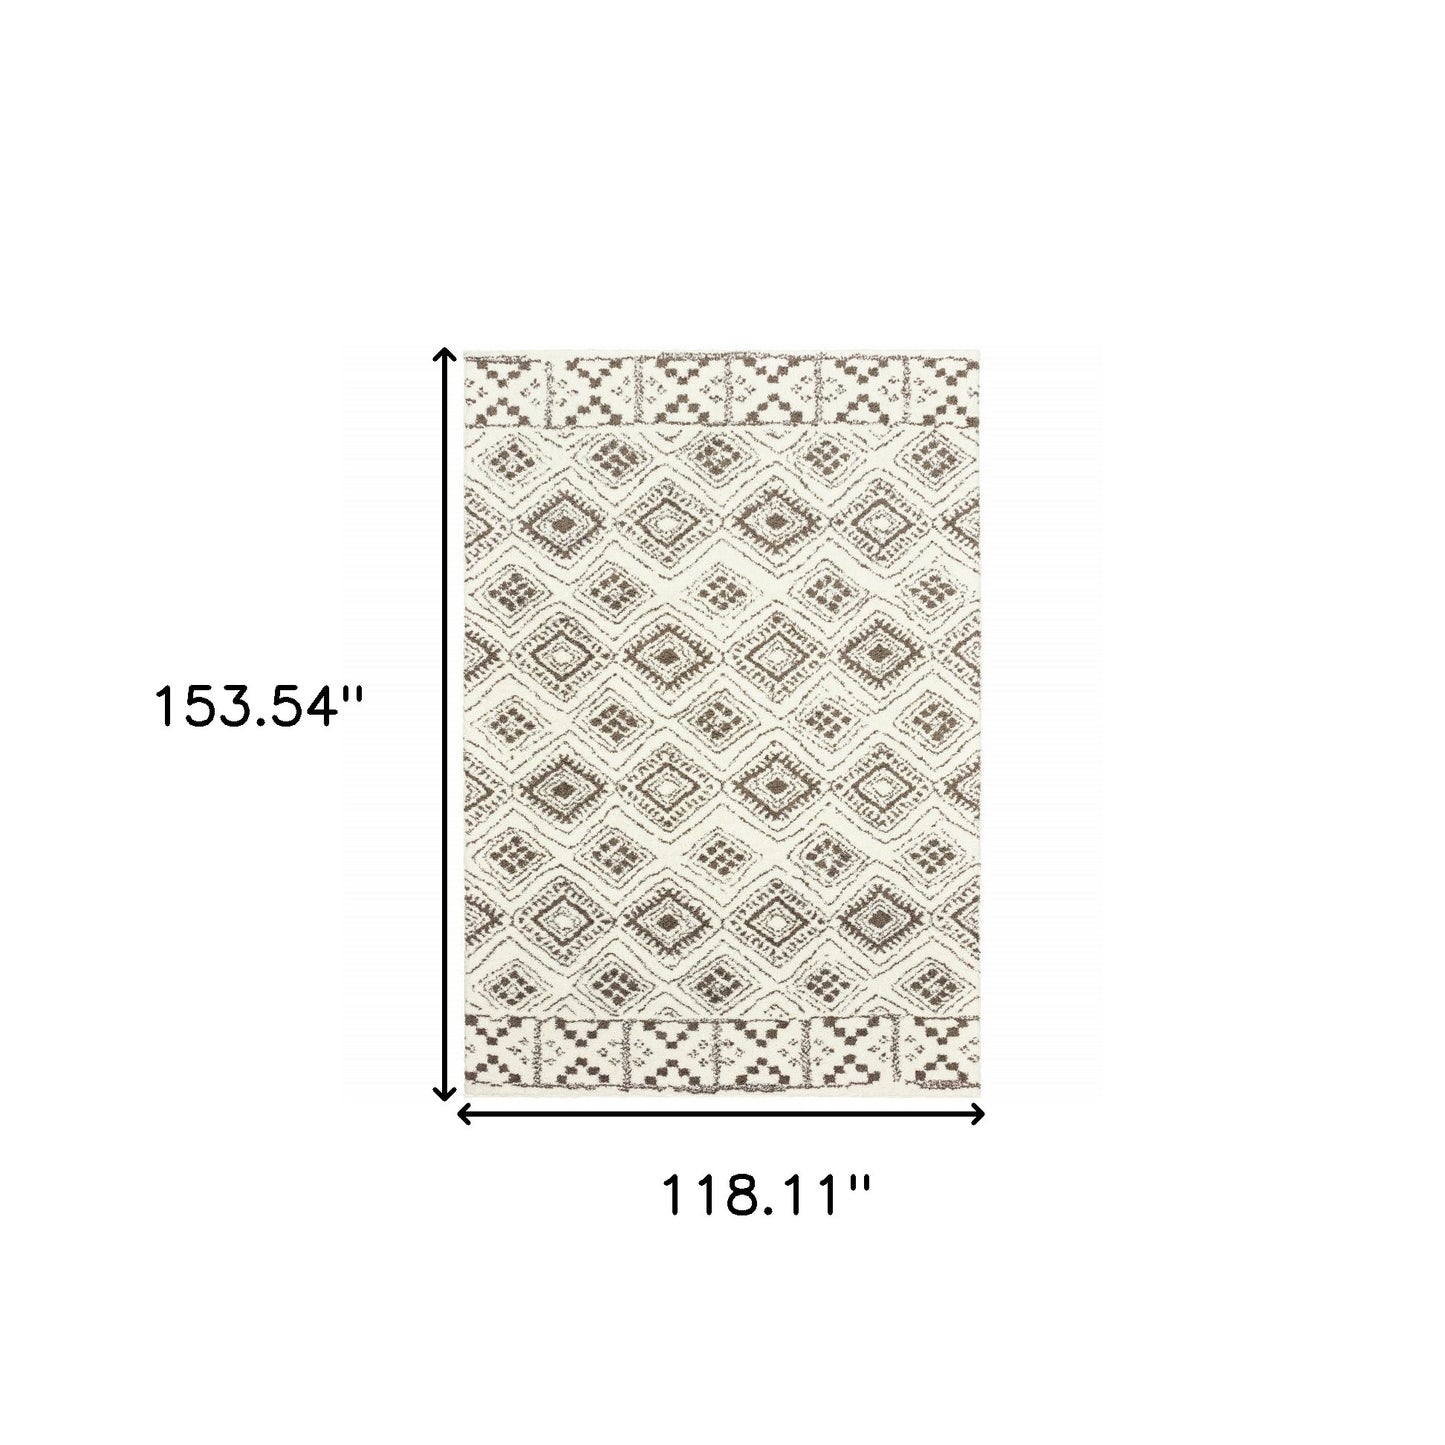 10' X 13' Ivory And Brown Geometric Shag Power Loom Stain Resistant Area Rug